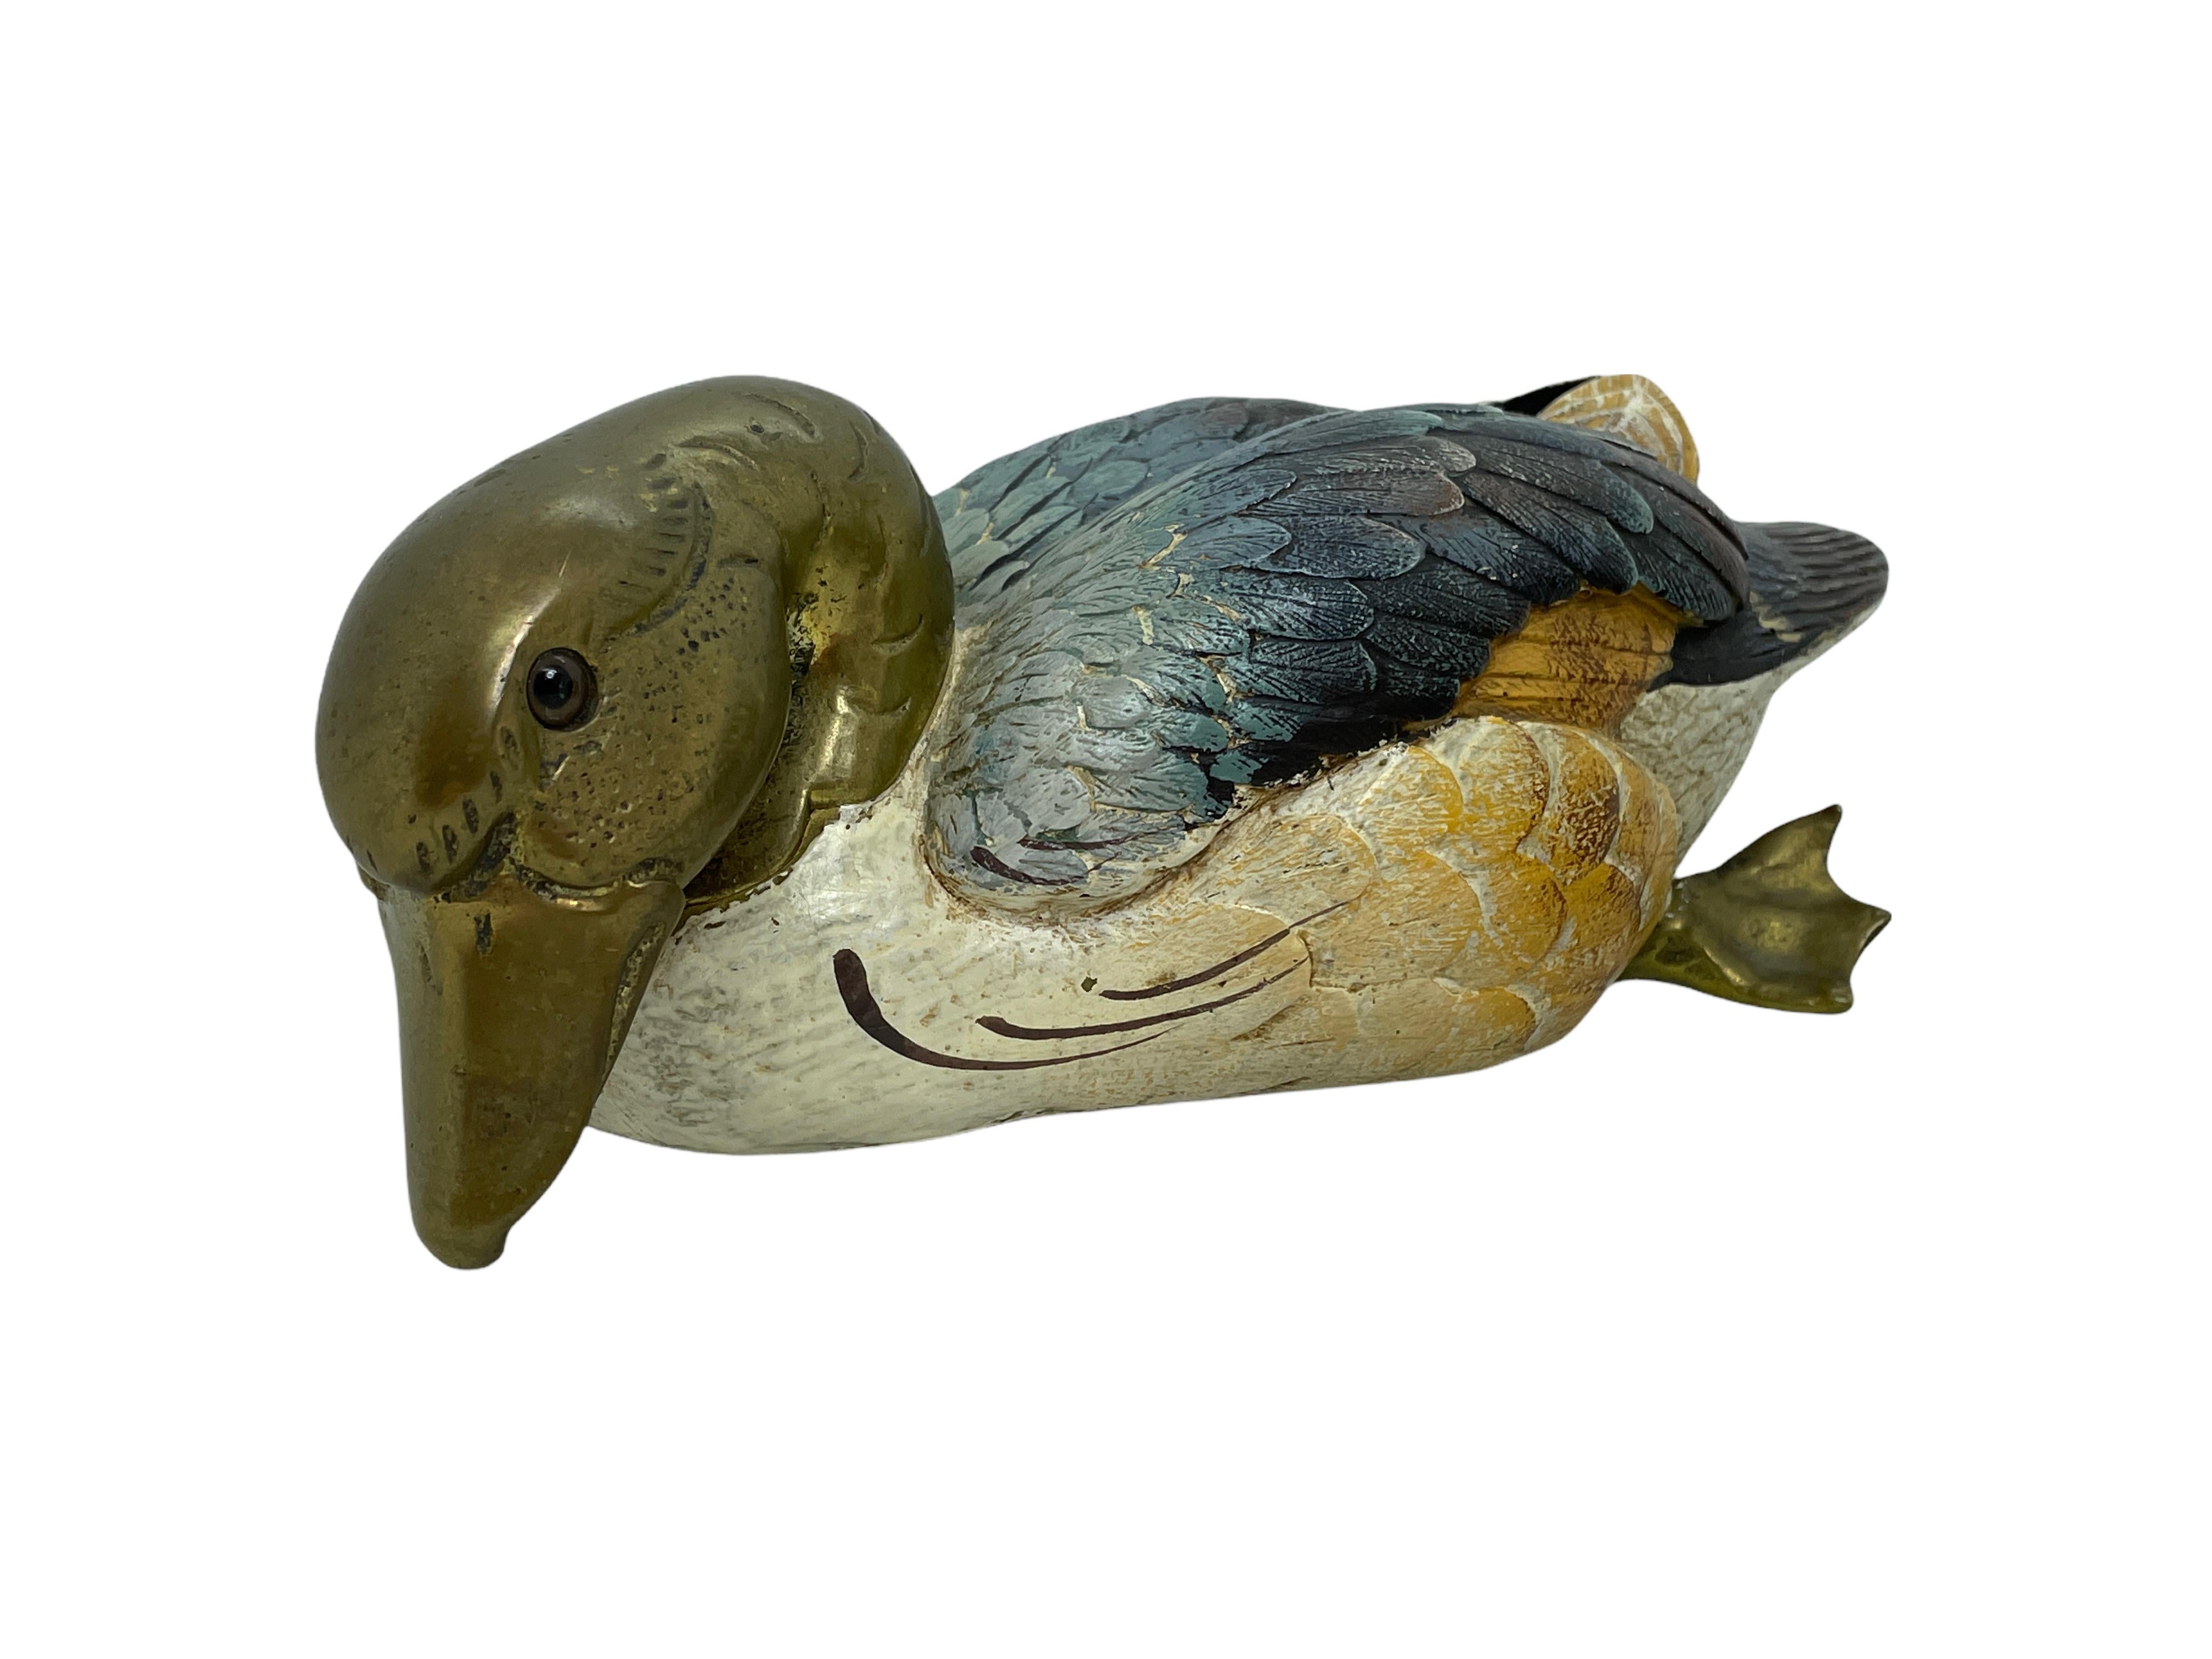 Vintage signed duck figurine by Malevolti, Italy. It features a decoy type design with brass accented parts. It has glass eyes and a hand painted body. A nice addition to the Hollywood Regency interior. Signed Malevolti Italy.